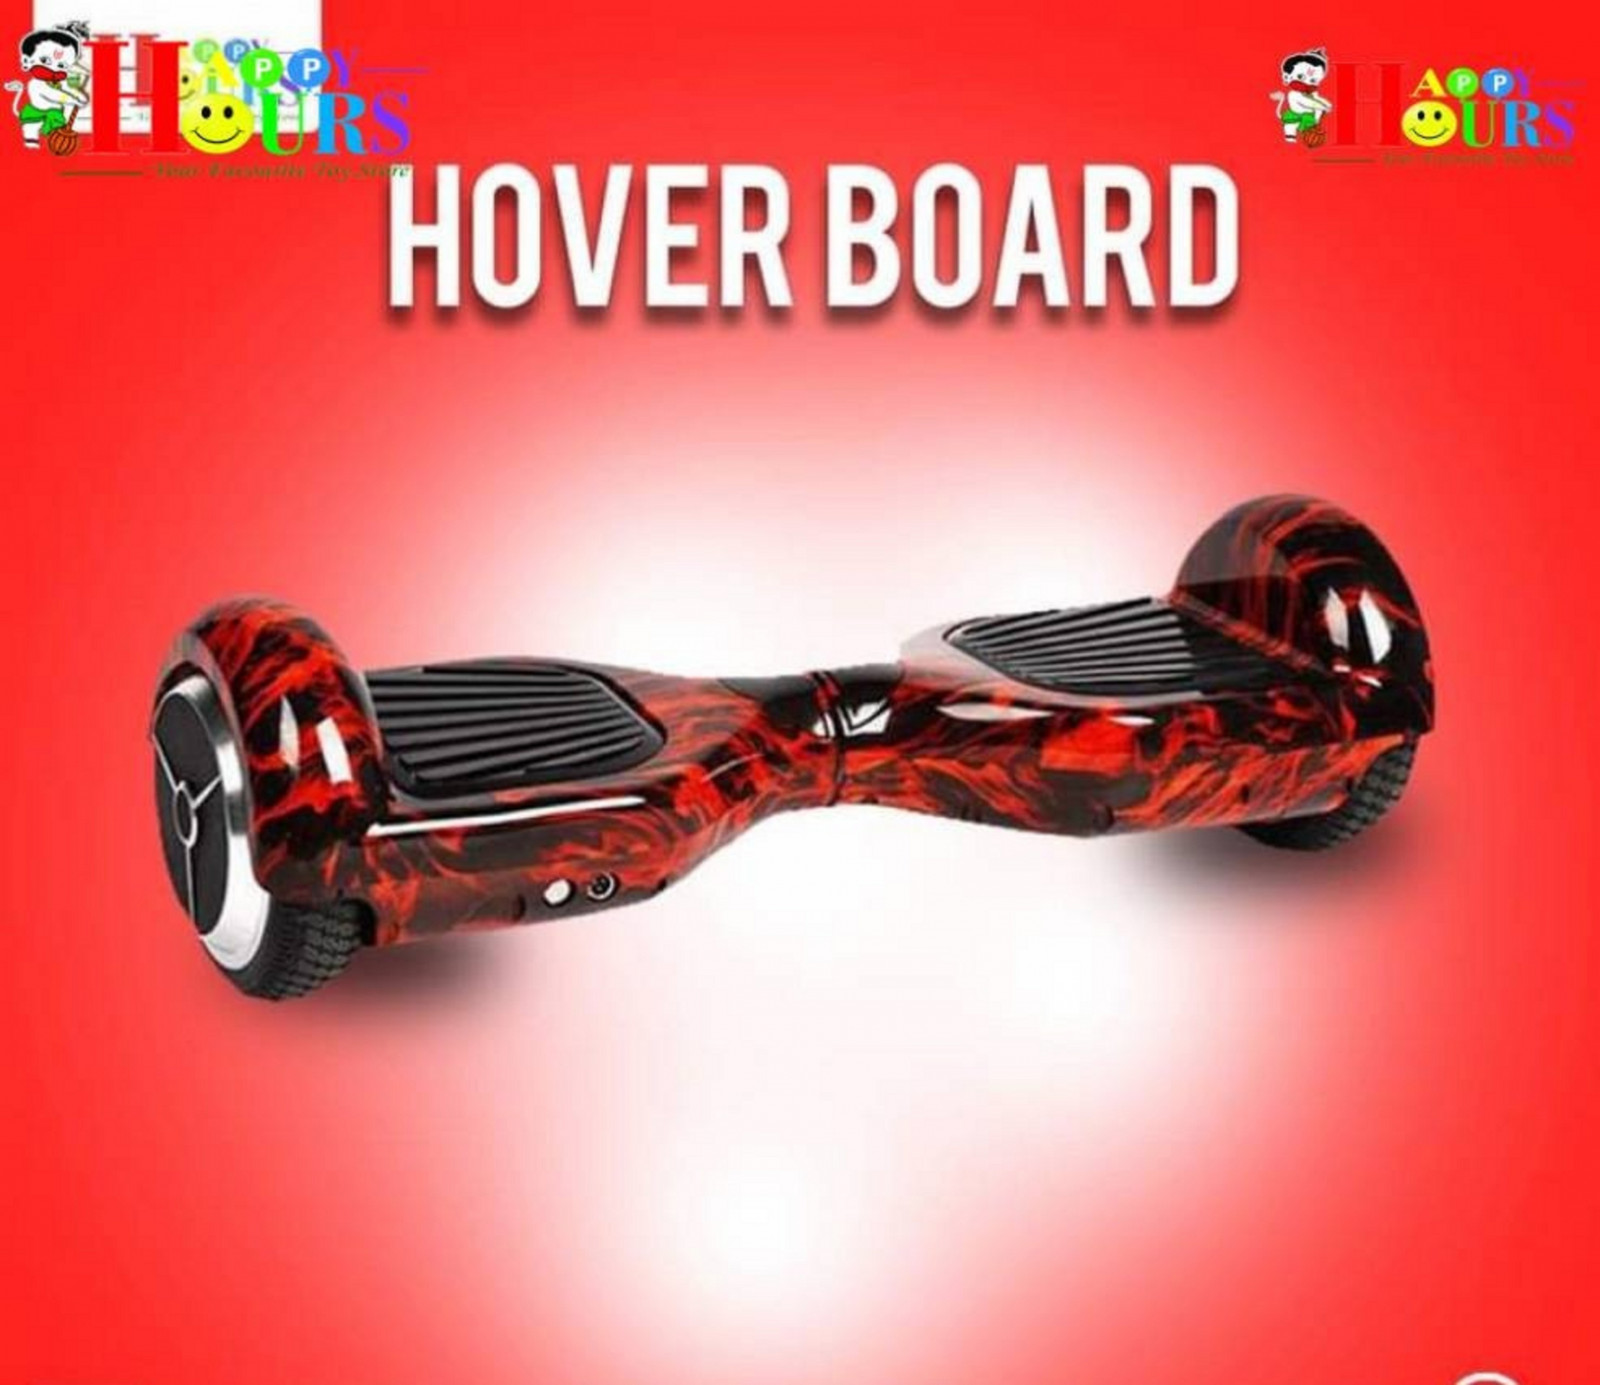 6.5 INCHES HOVERBOARD